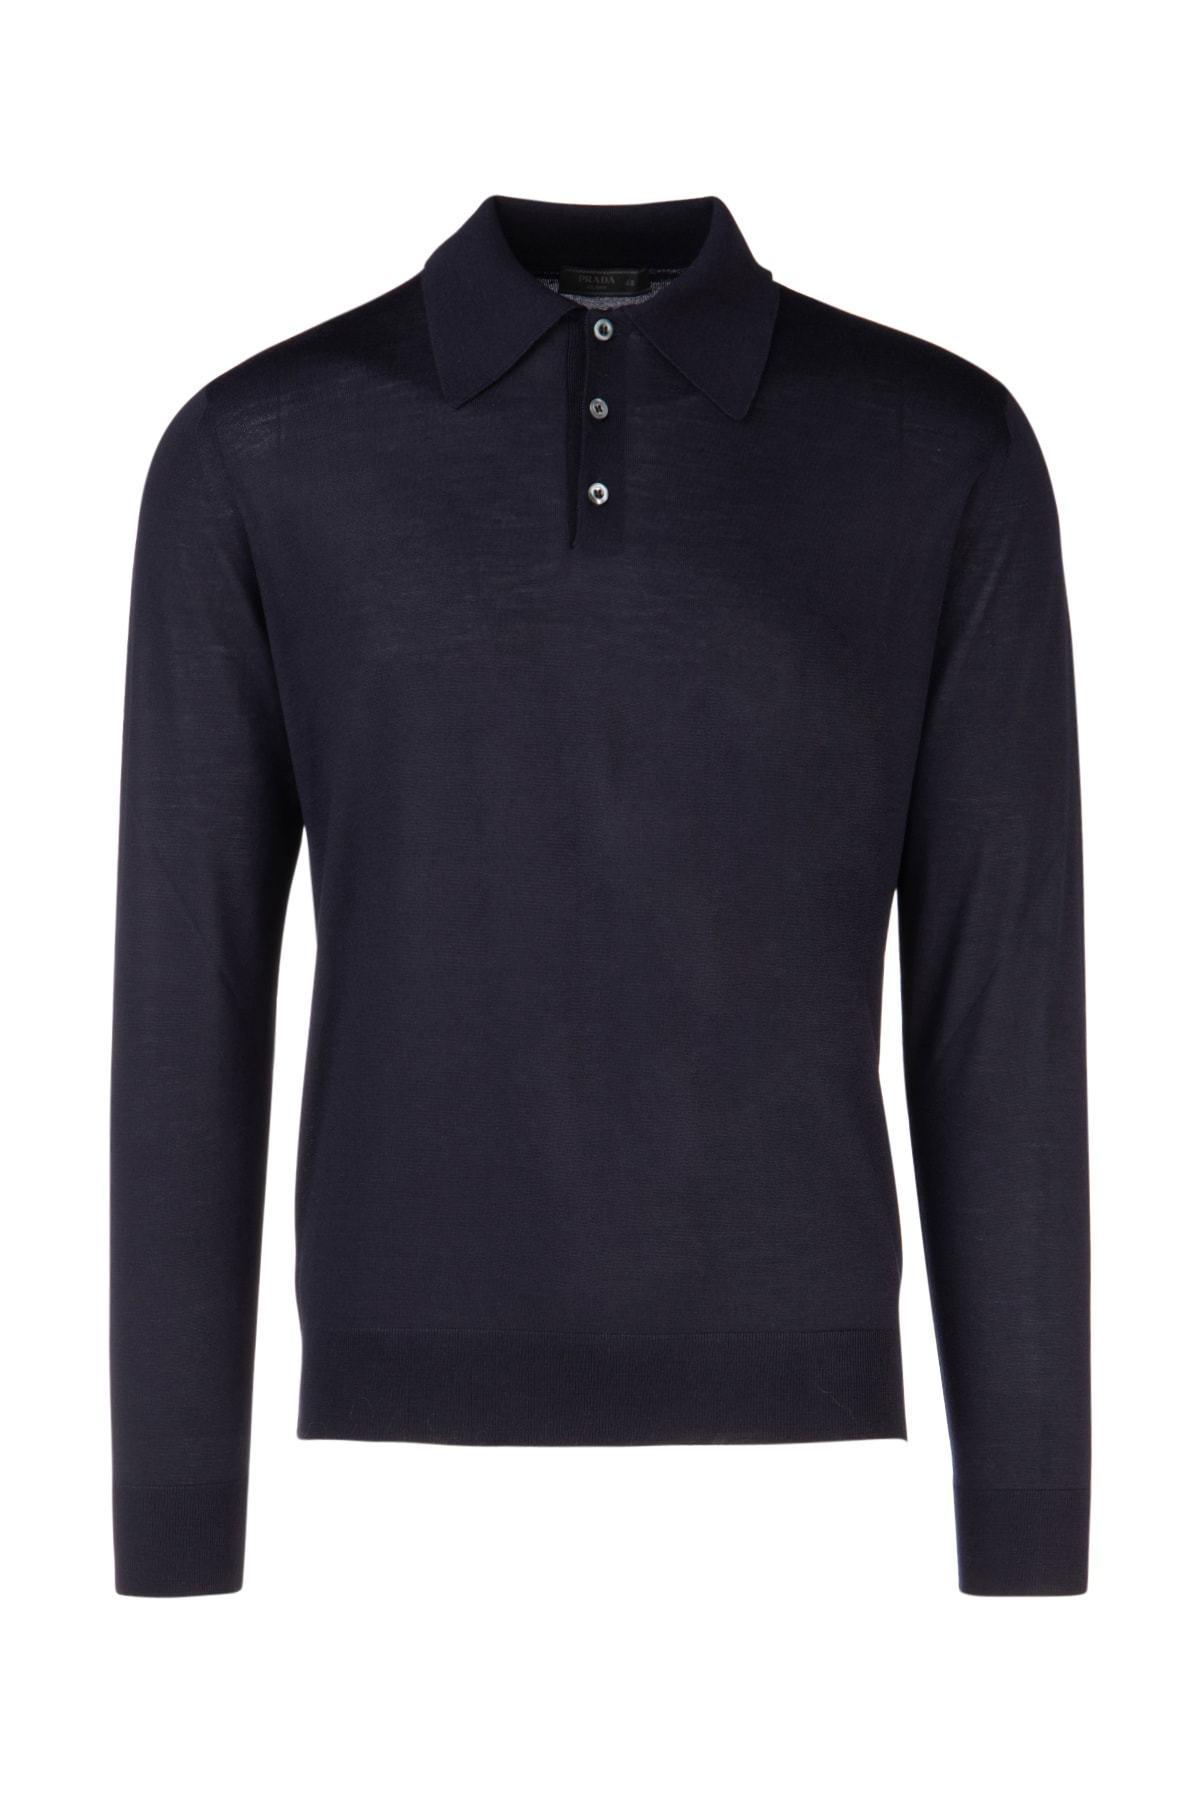 Prada Wool Knitted Polo Shirt in Navy (Blue) for Men - Lyst